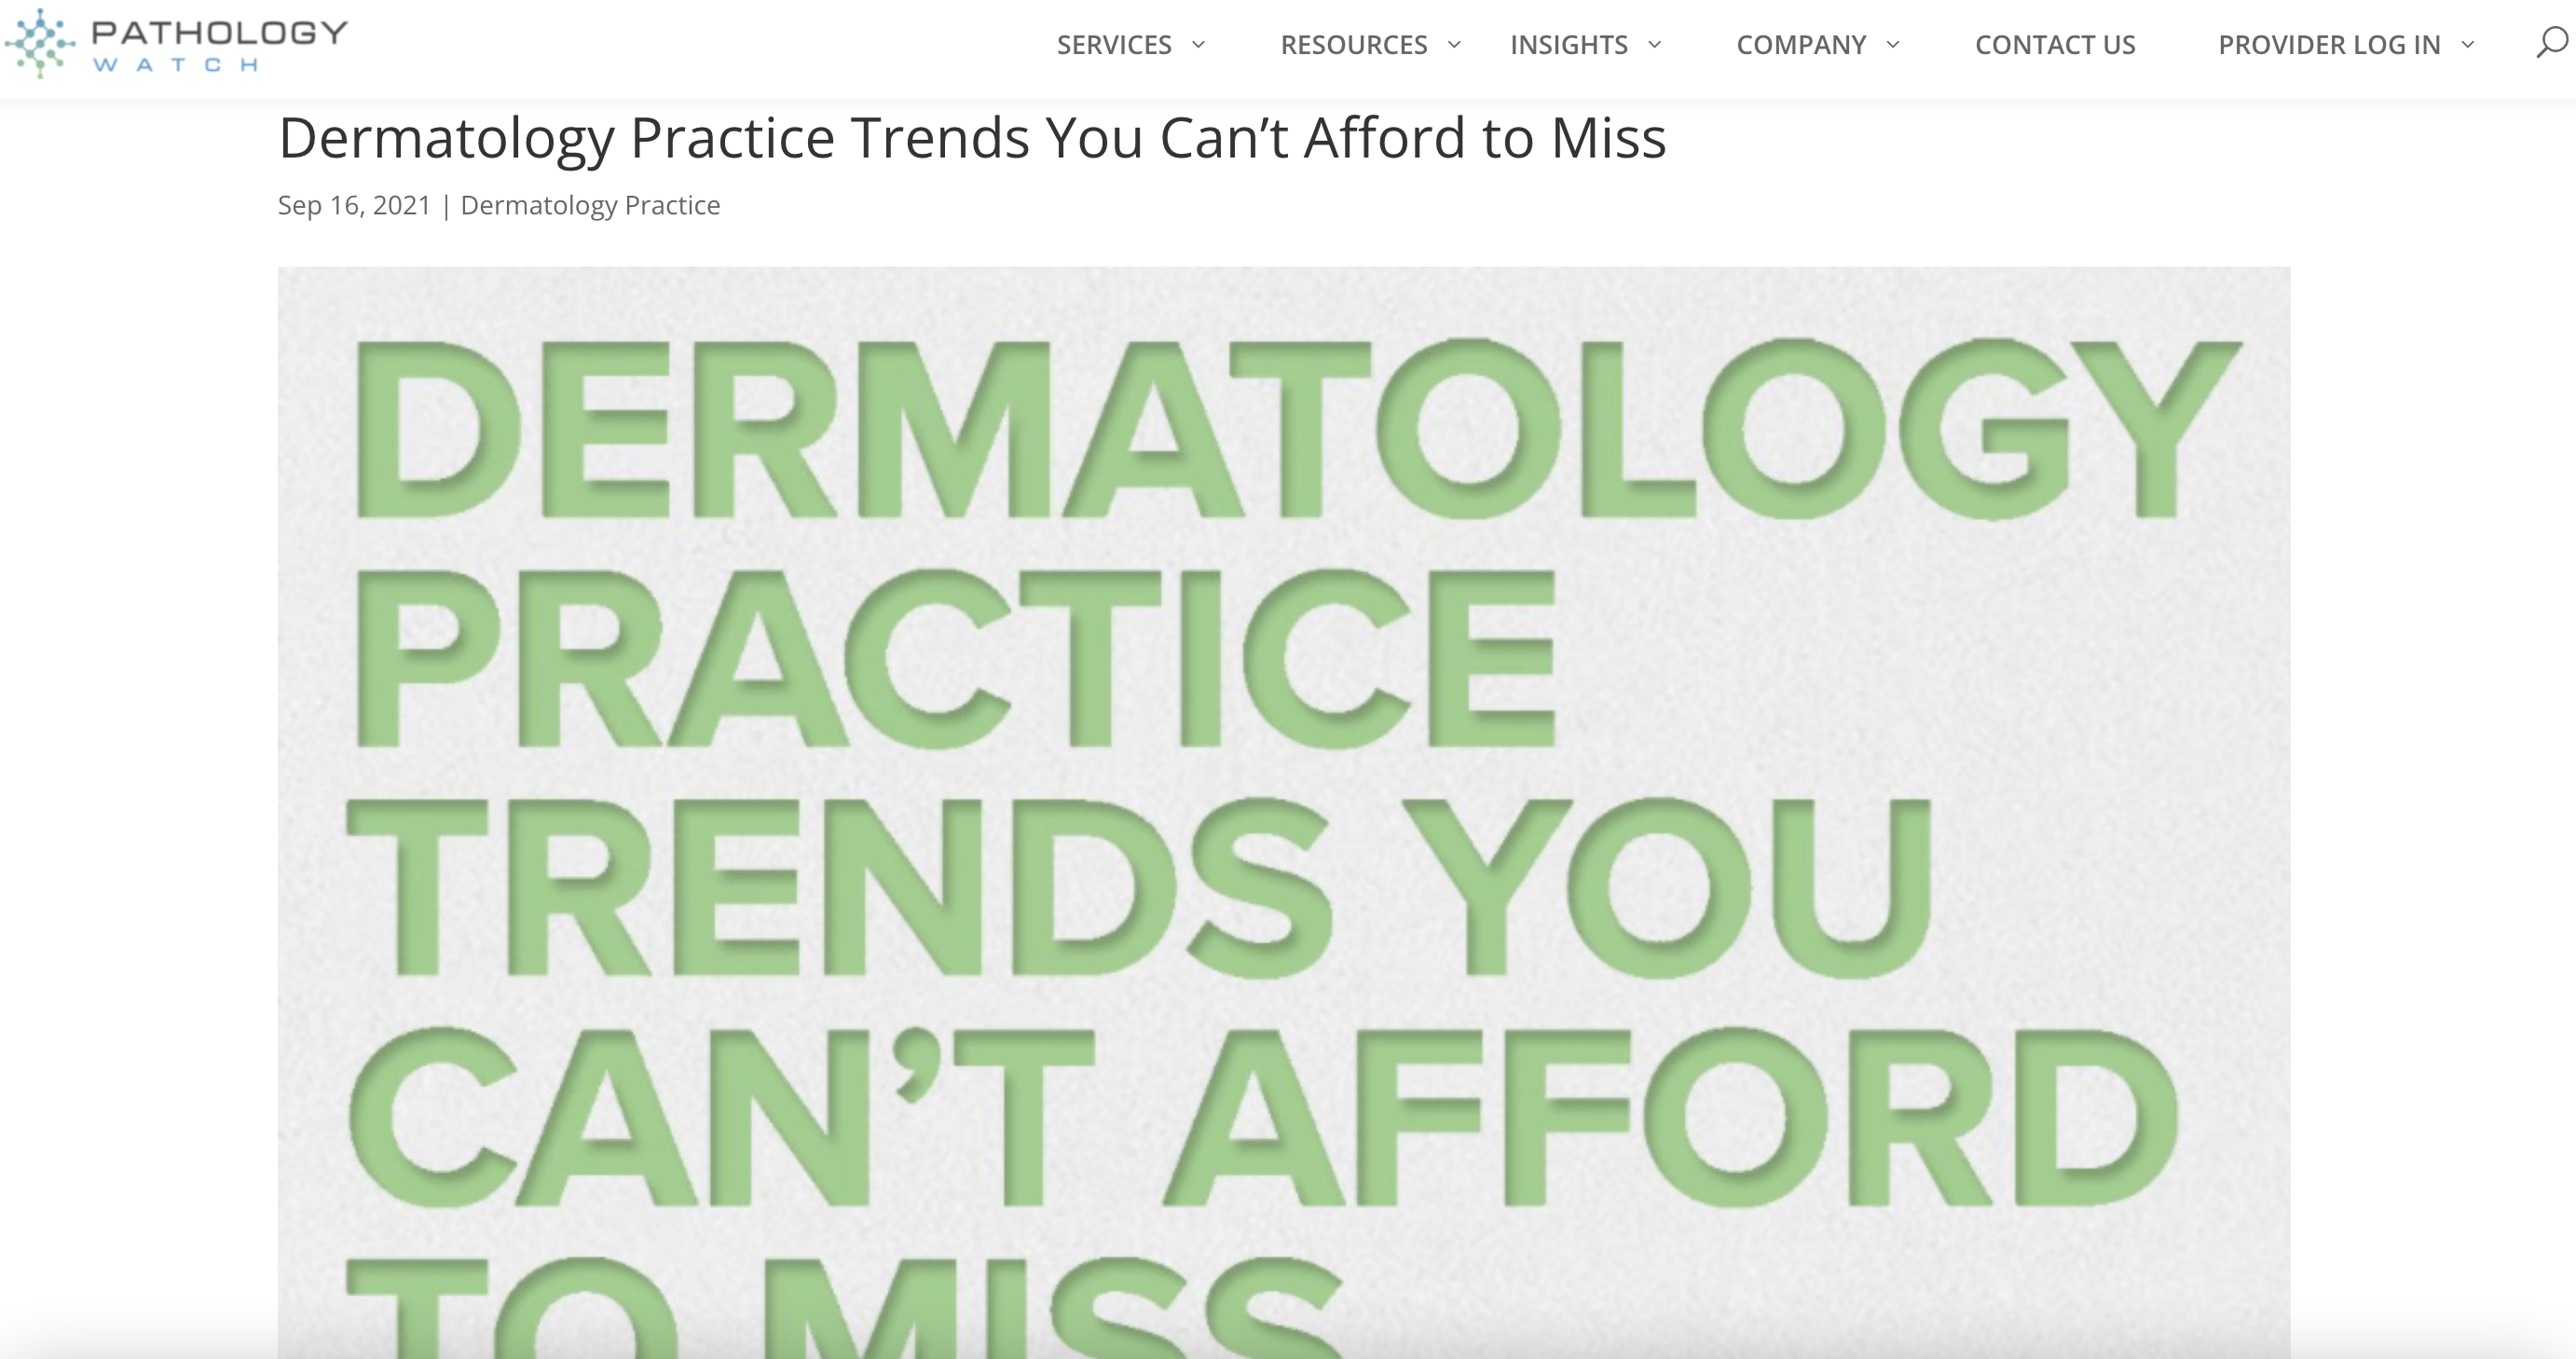 Dermatology Practice Trends You Can’t Afford to Miss